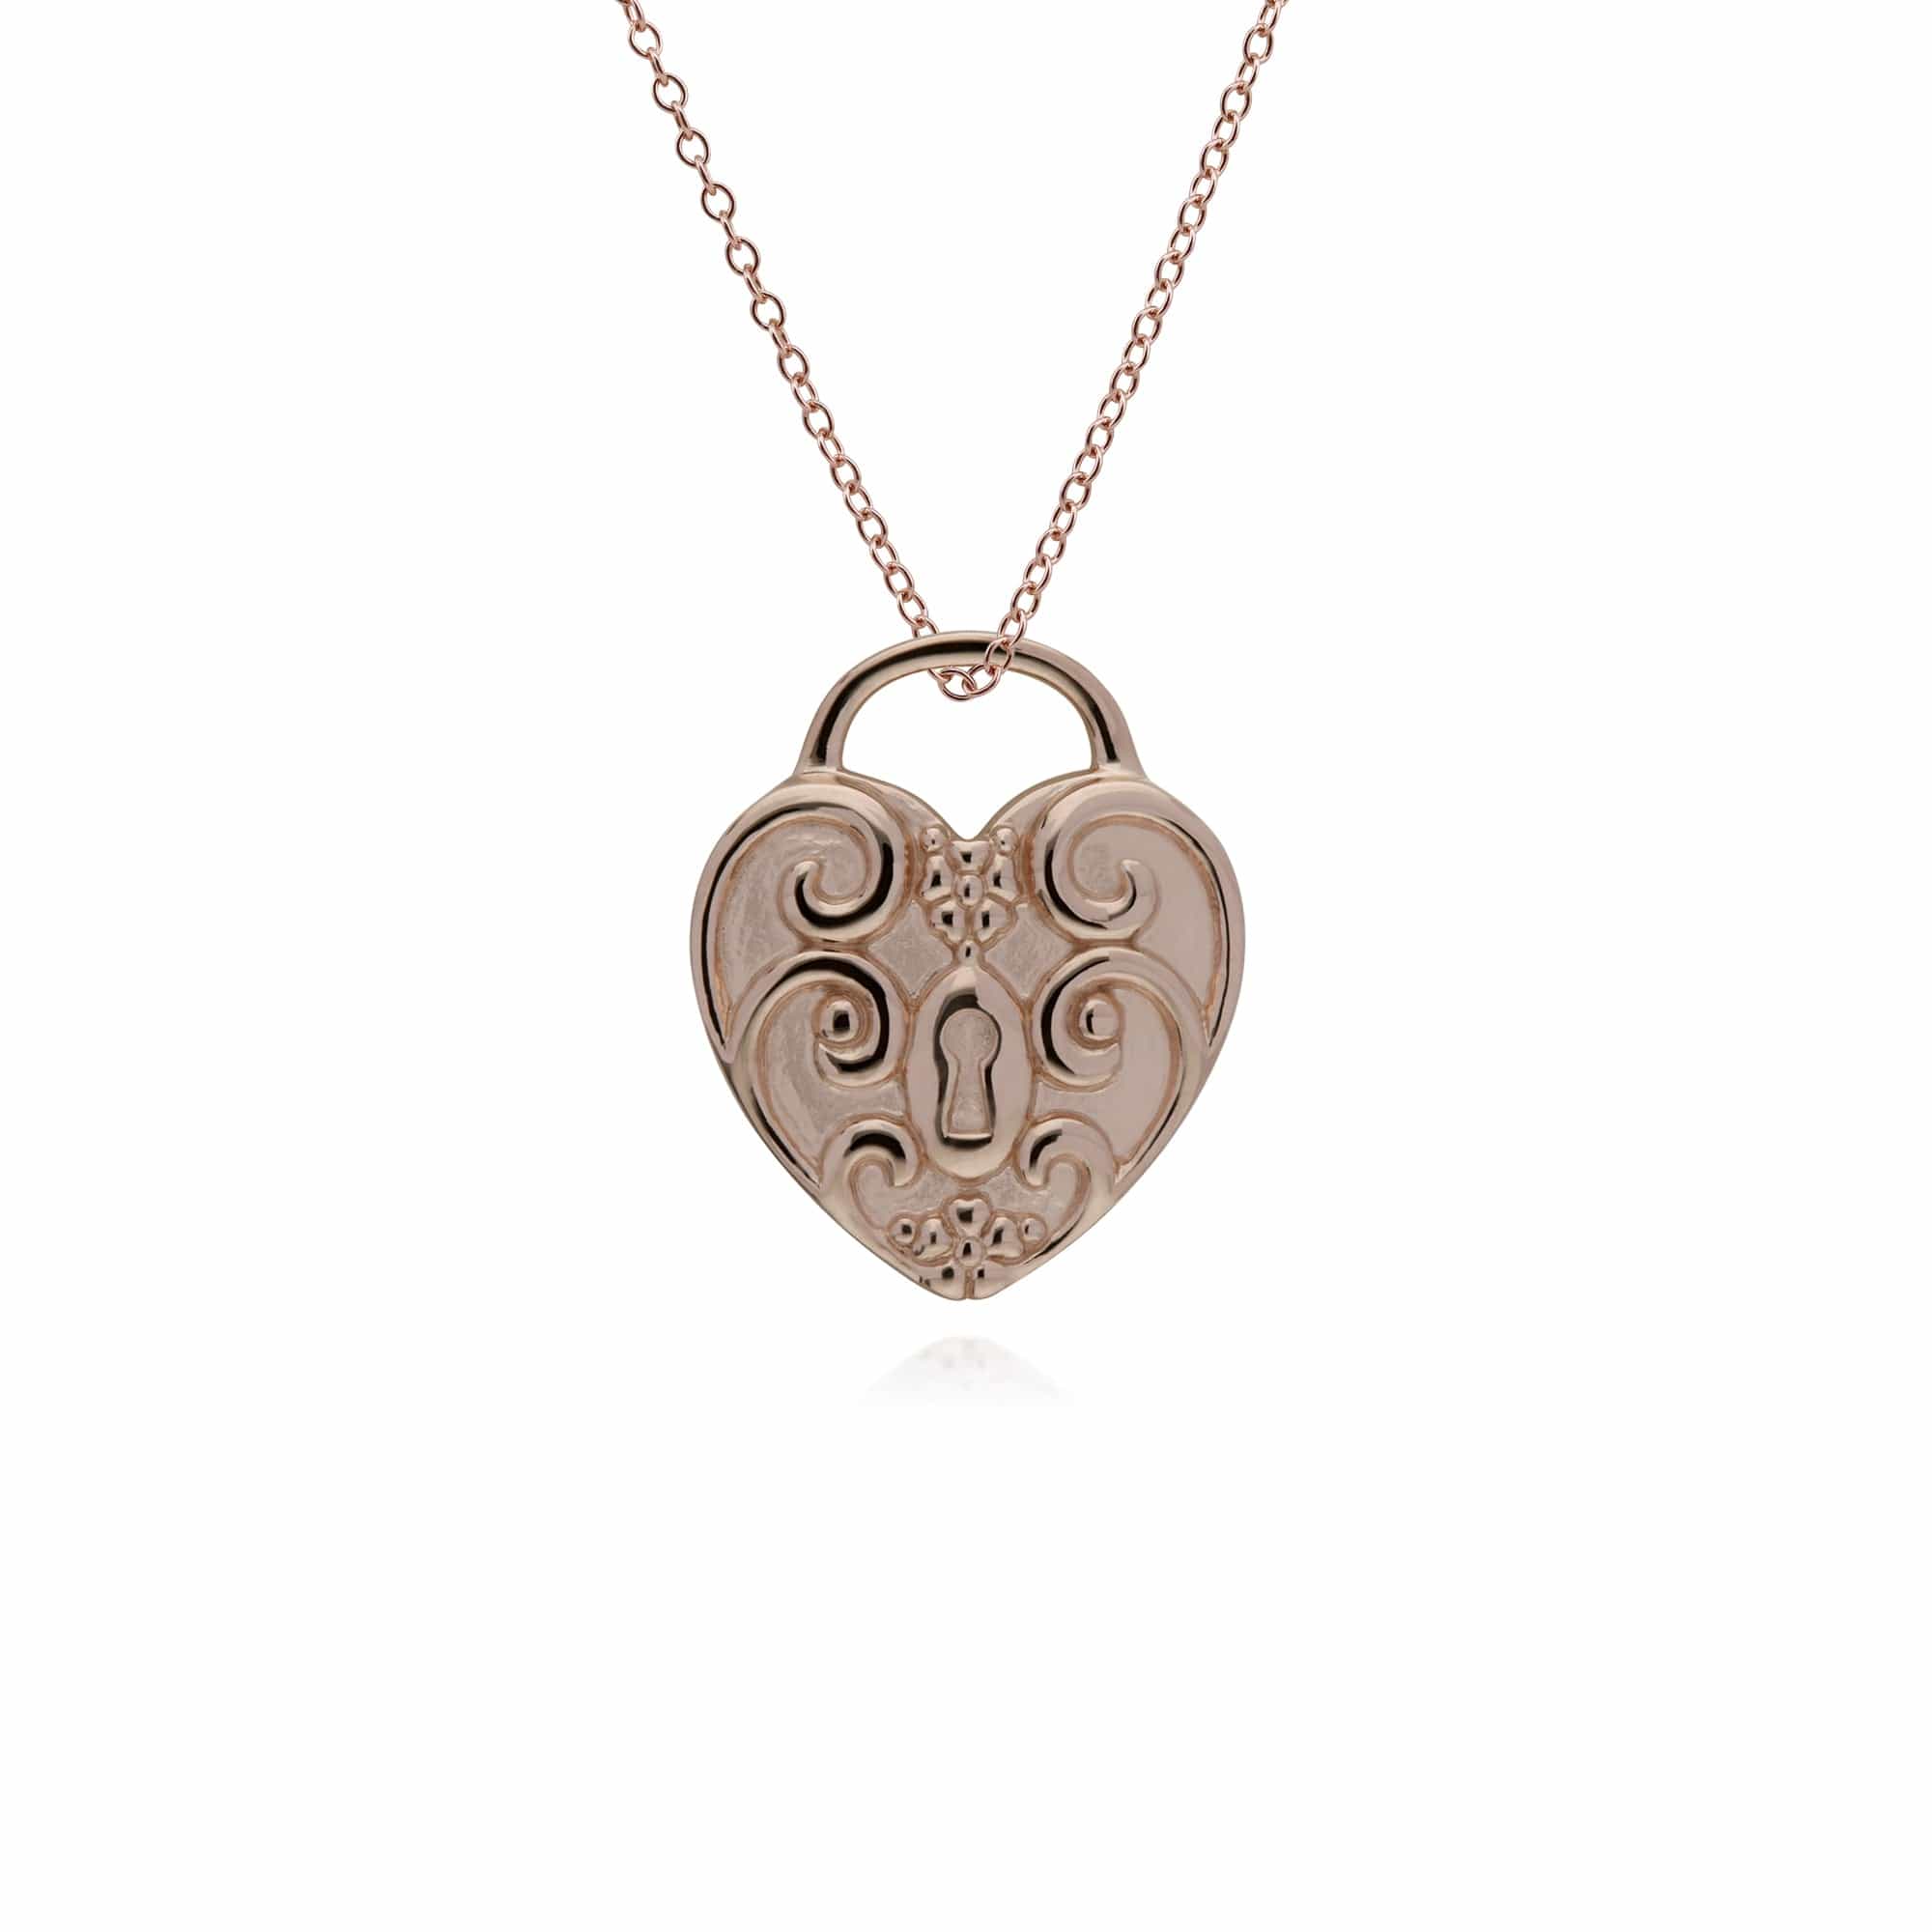 270P026703925-270P026501925 Classic Swirl Heart Lock Pendant & Ruby Big Key Charm in Rose Gold Plated 925 Sterling Silver 3